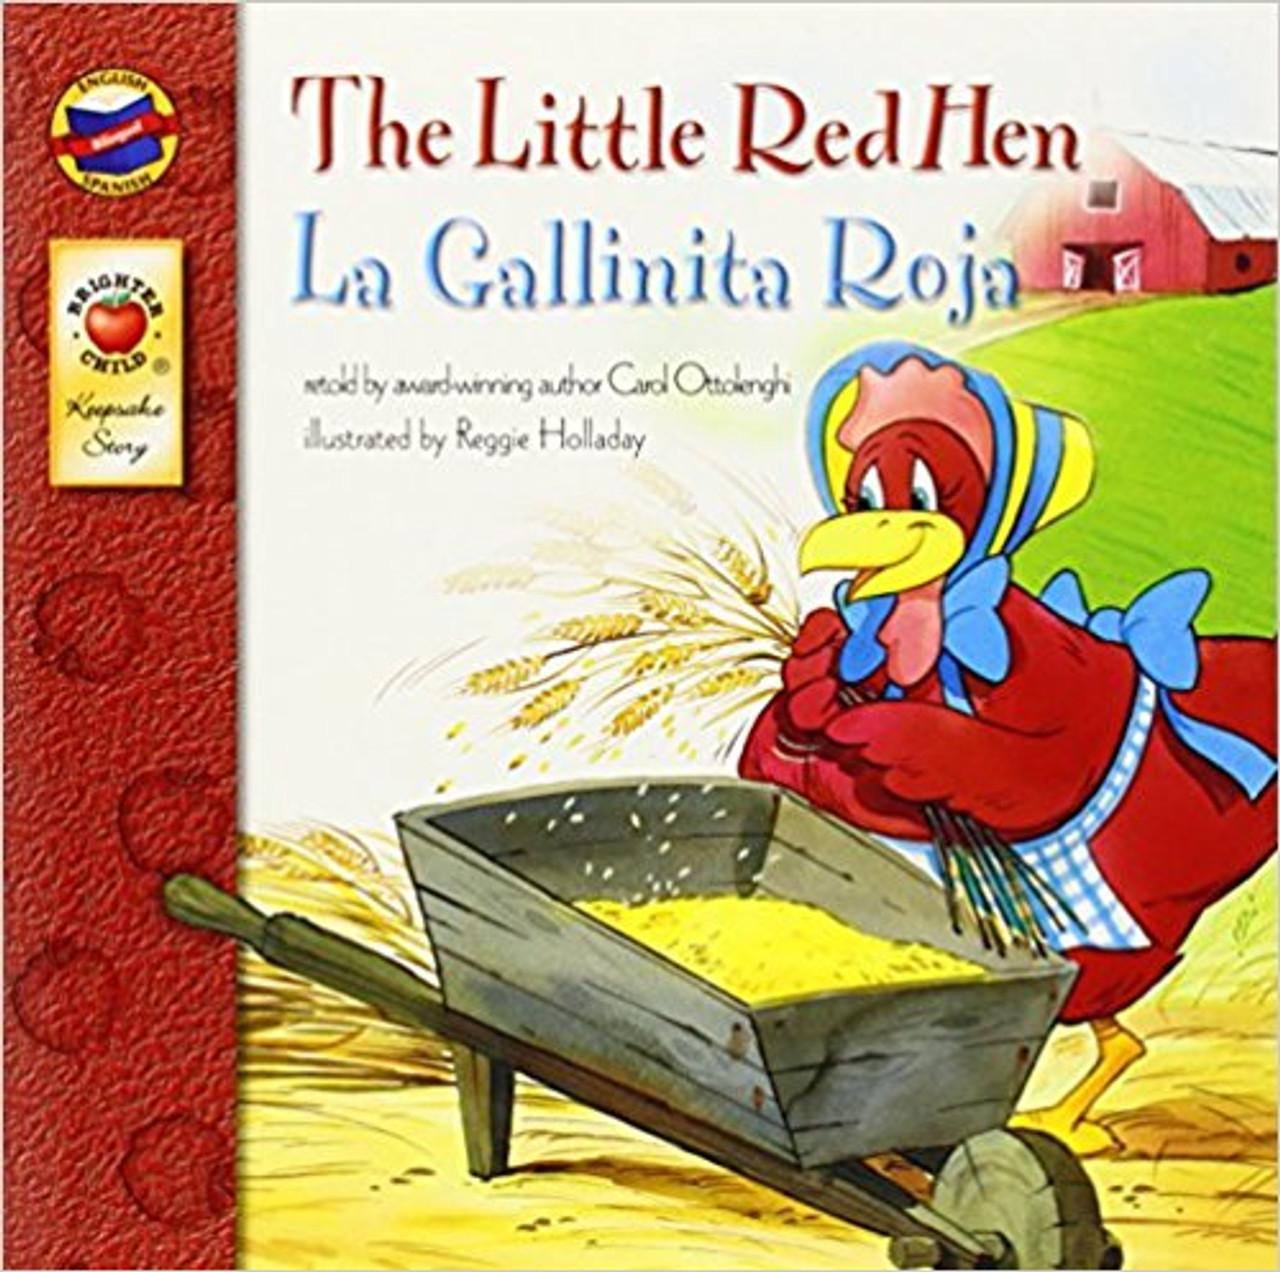 English-Spanish Version In this beloved tale, the Little Red Hen makes delicious bread that her lazy friends can't resist. Children will eagerly continue reading to see what she will do when everyone wants a taste!